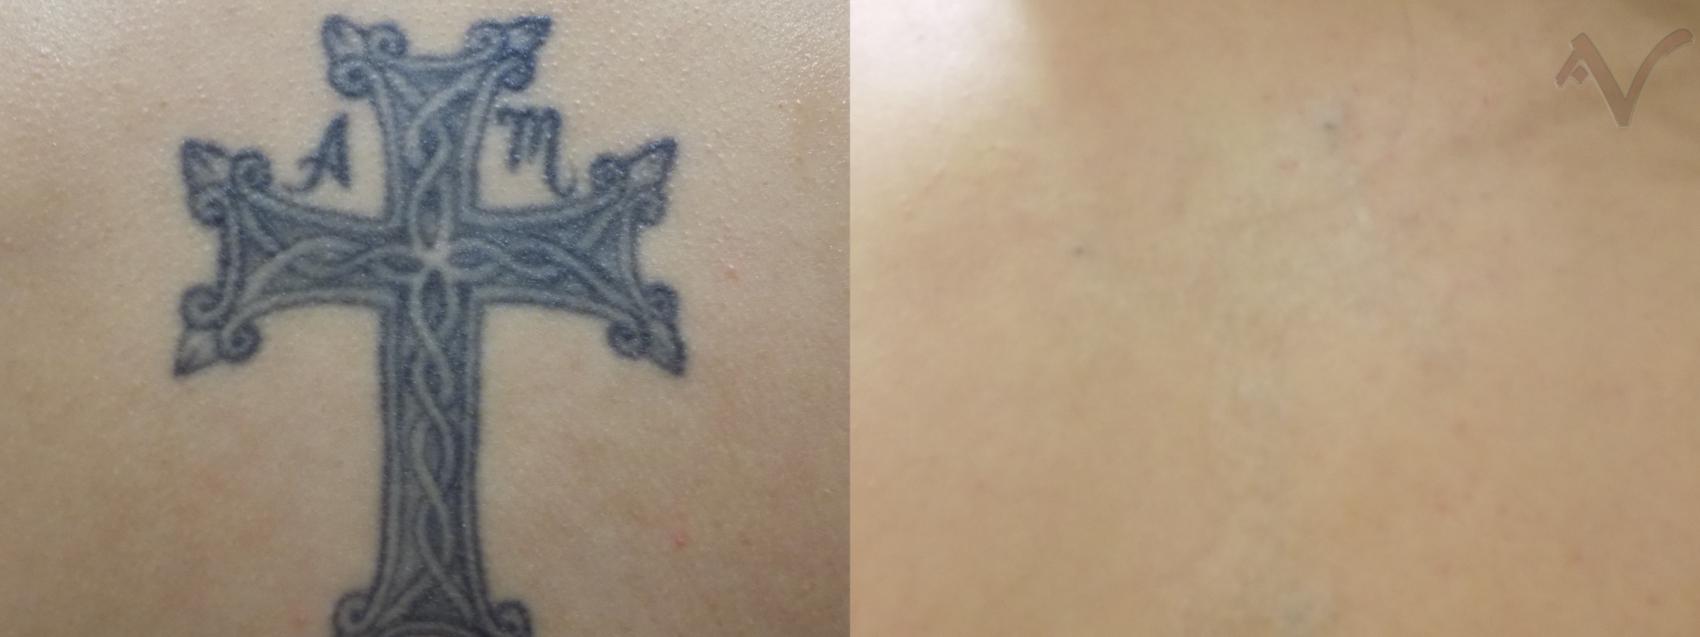 VIDEO Laser Tattoo Removal Los Angeles Patient Video Results  Dr U Hair   Skin Clinic  FUE Hair Restoration Dermatology and Laser Surgery  Los  Angeles Manhattan Beach  Dr Sanusi Umar MD